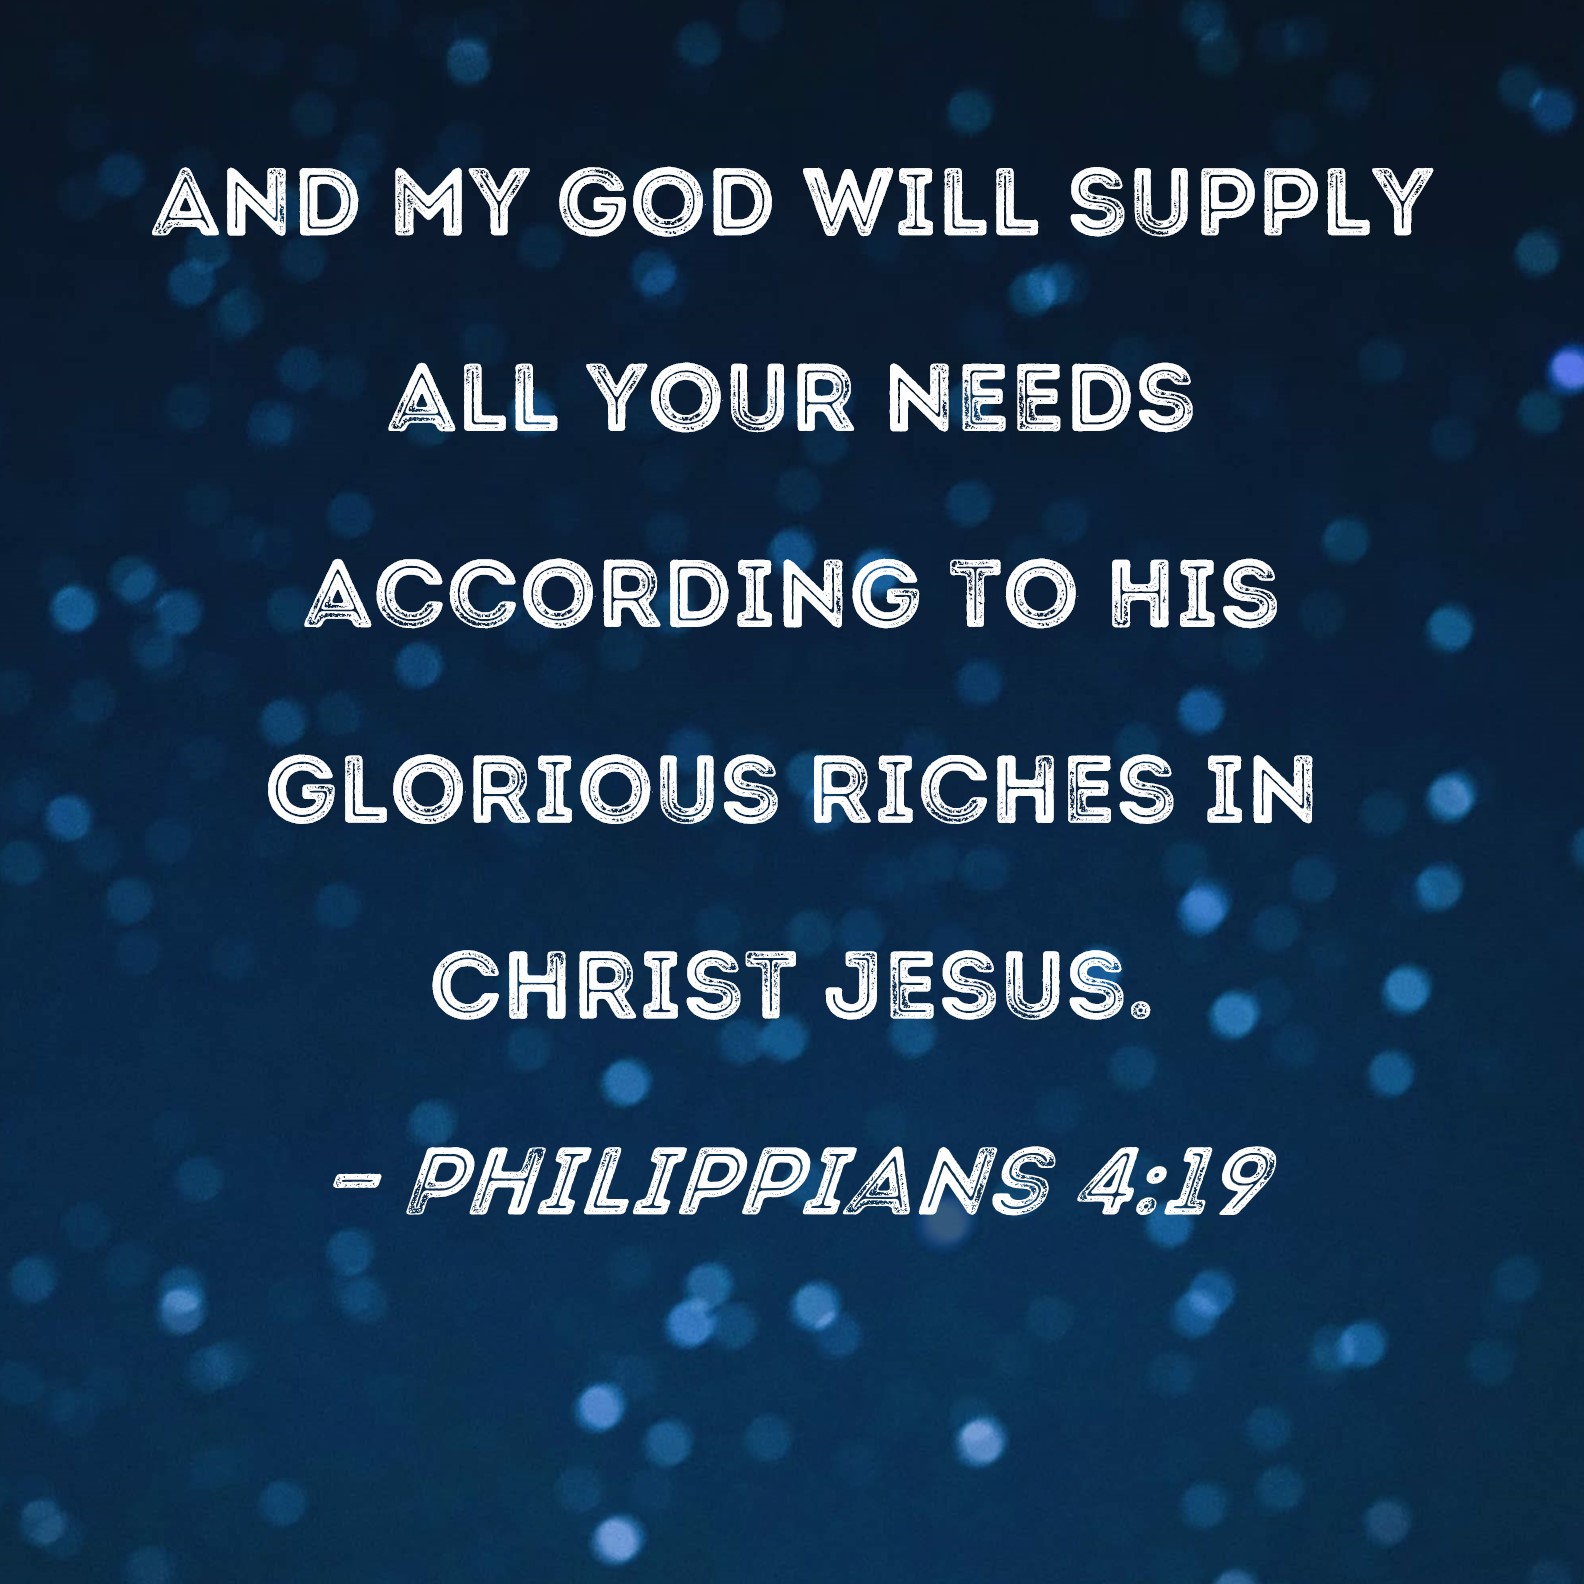 Philippians 4:19 But my God shall supply all your need according to his  riches in glory by Christ Jesus. And my God shall supply every need of  yours according to his riches